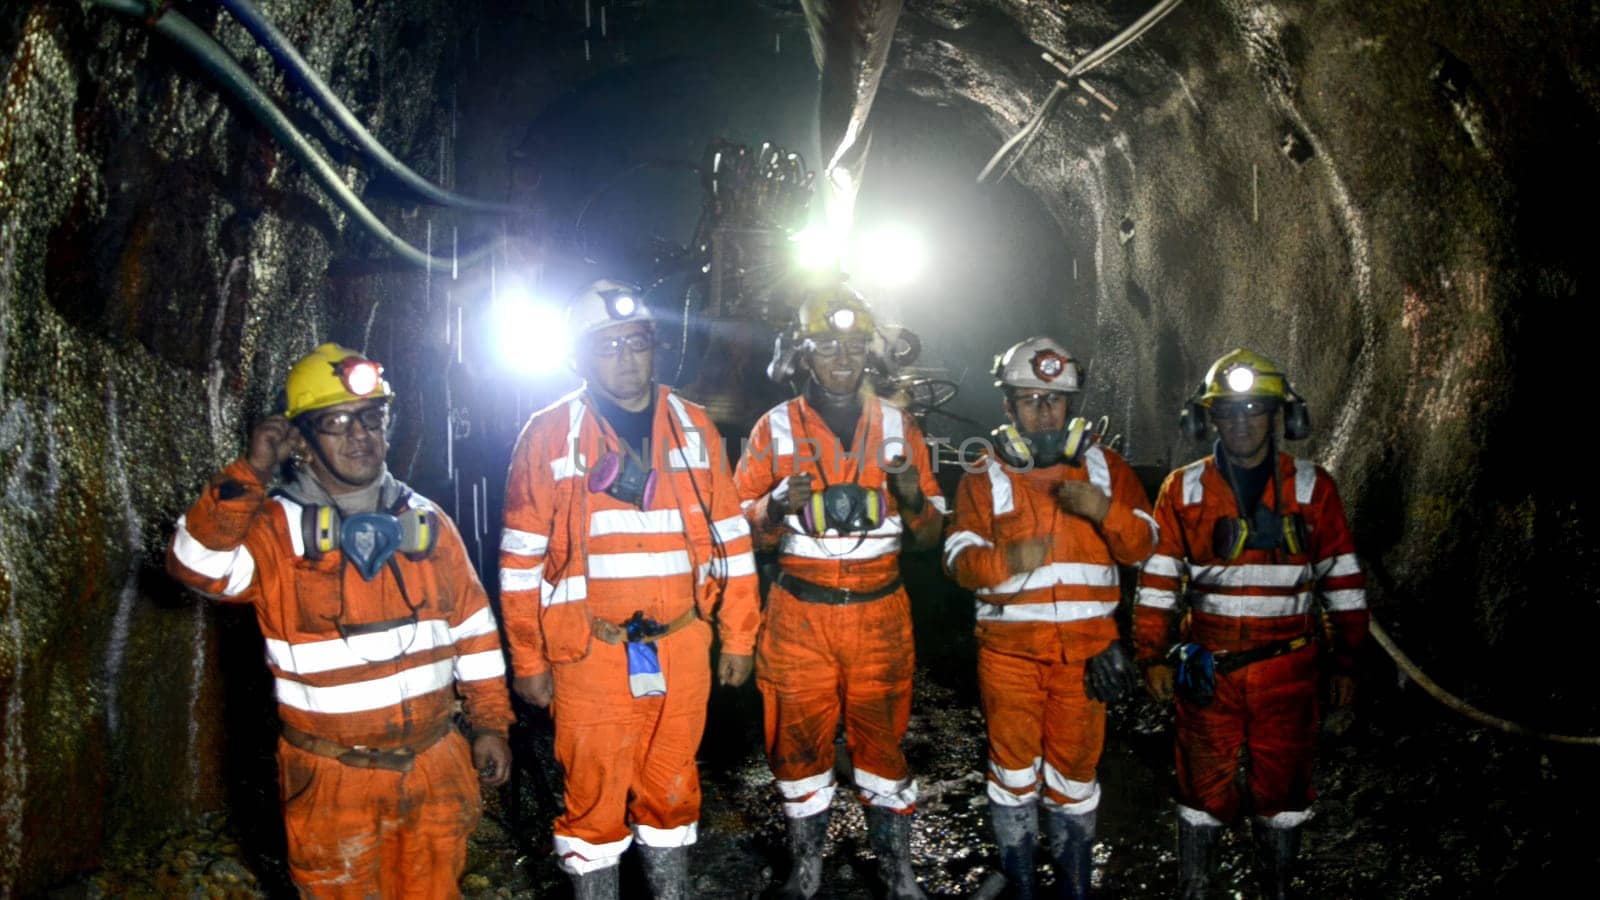 Cerro de Pasco, Peru - July 13th 2017 : Group of miners standing with safety gear inside a dark mine tunnel